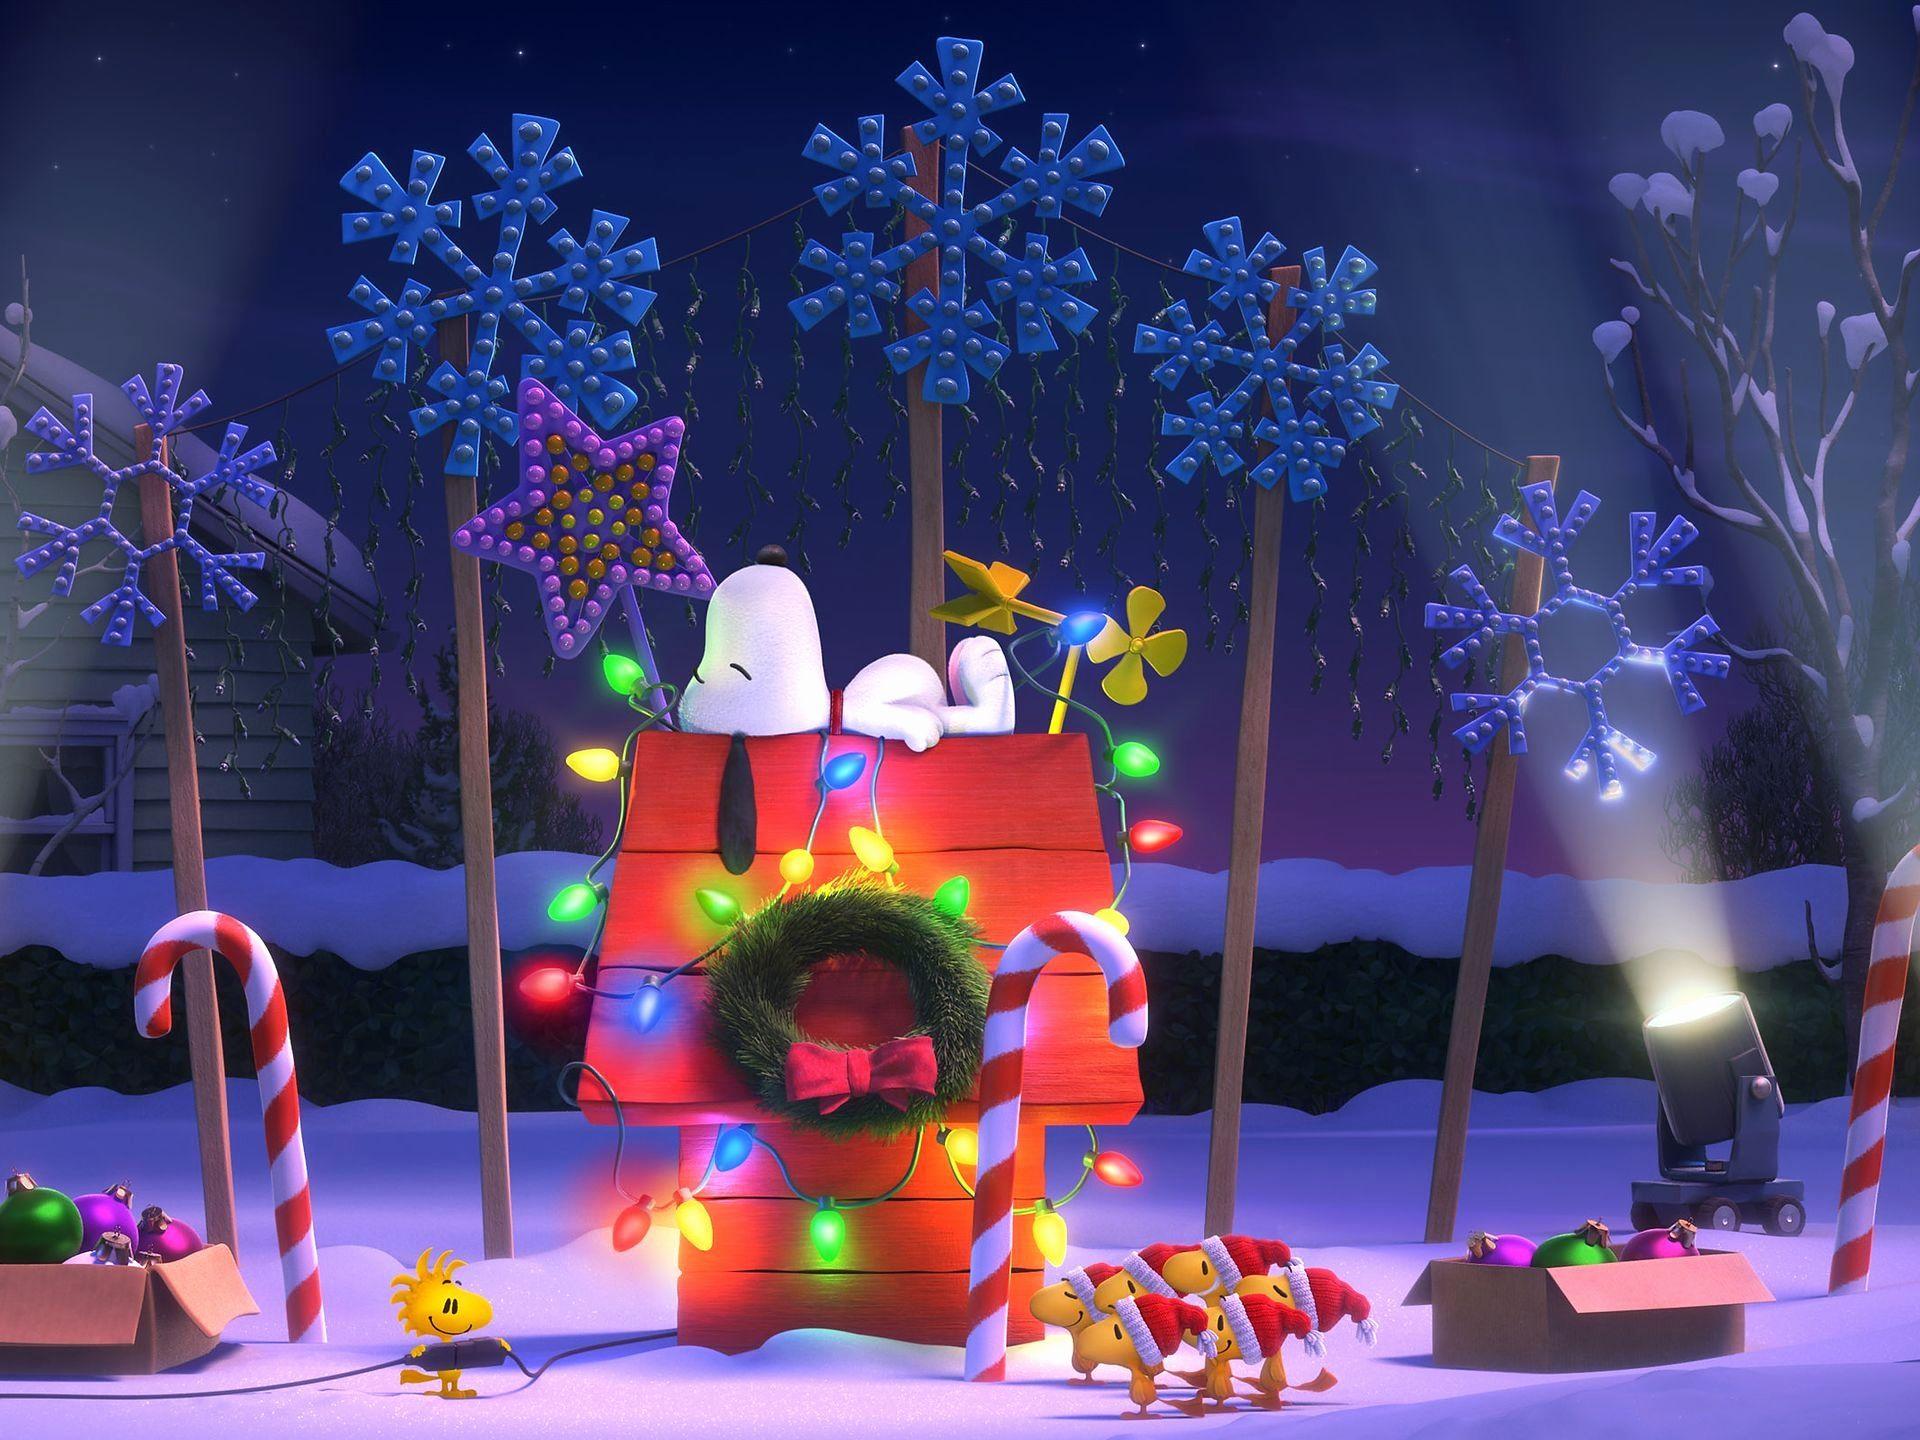 Snoopy Christmas HD Wallpapers - Top Free Snoopy Christmas HD ...